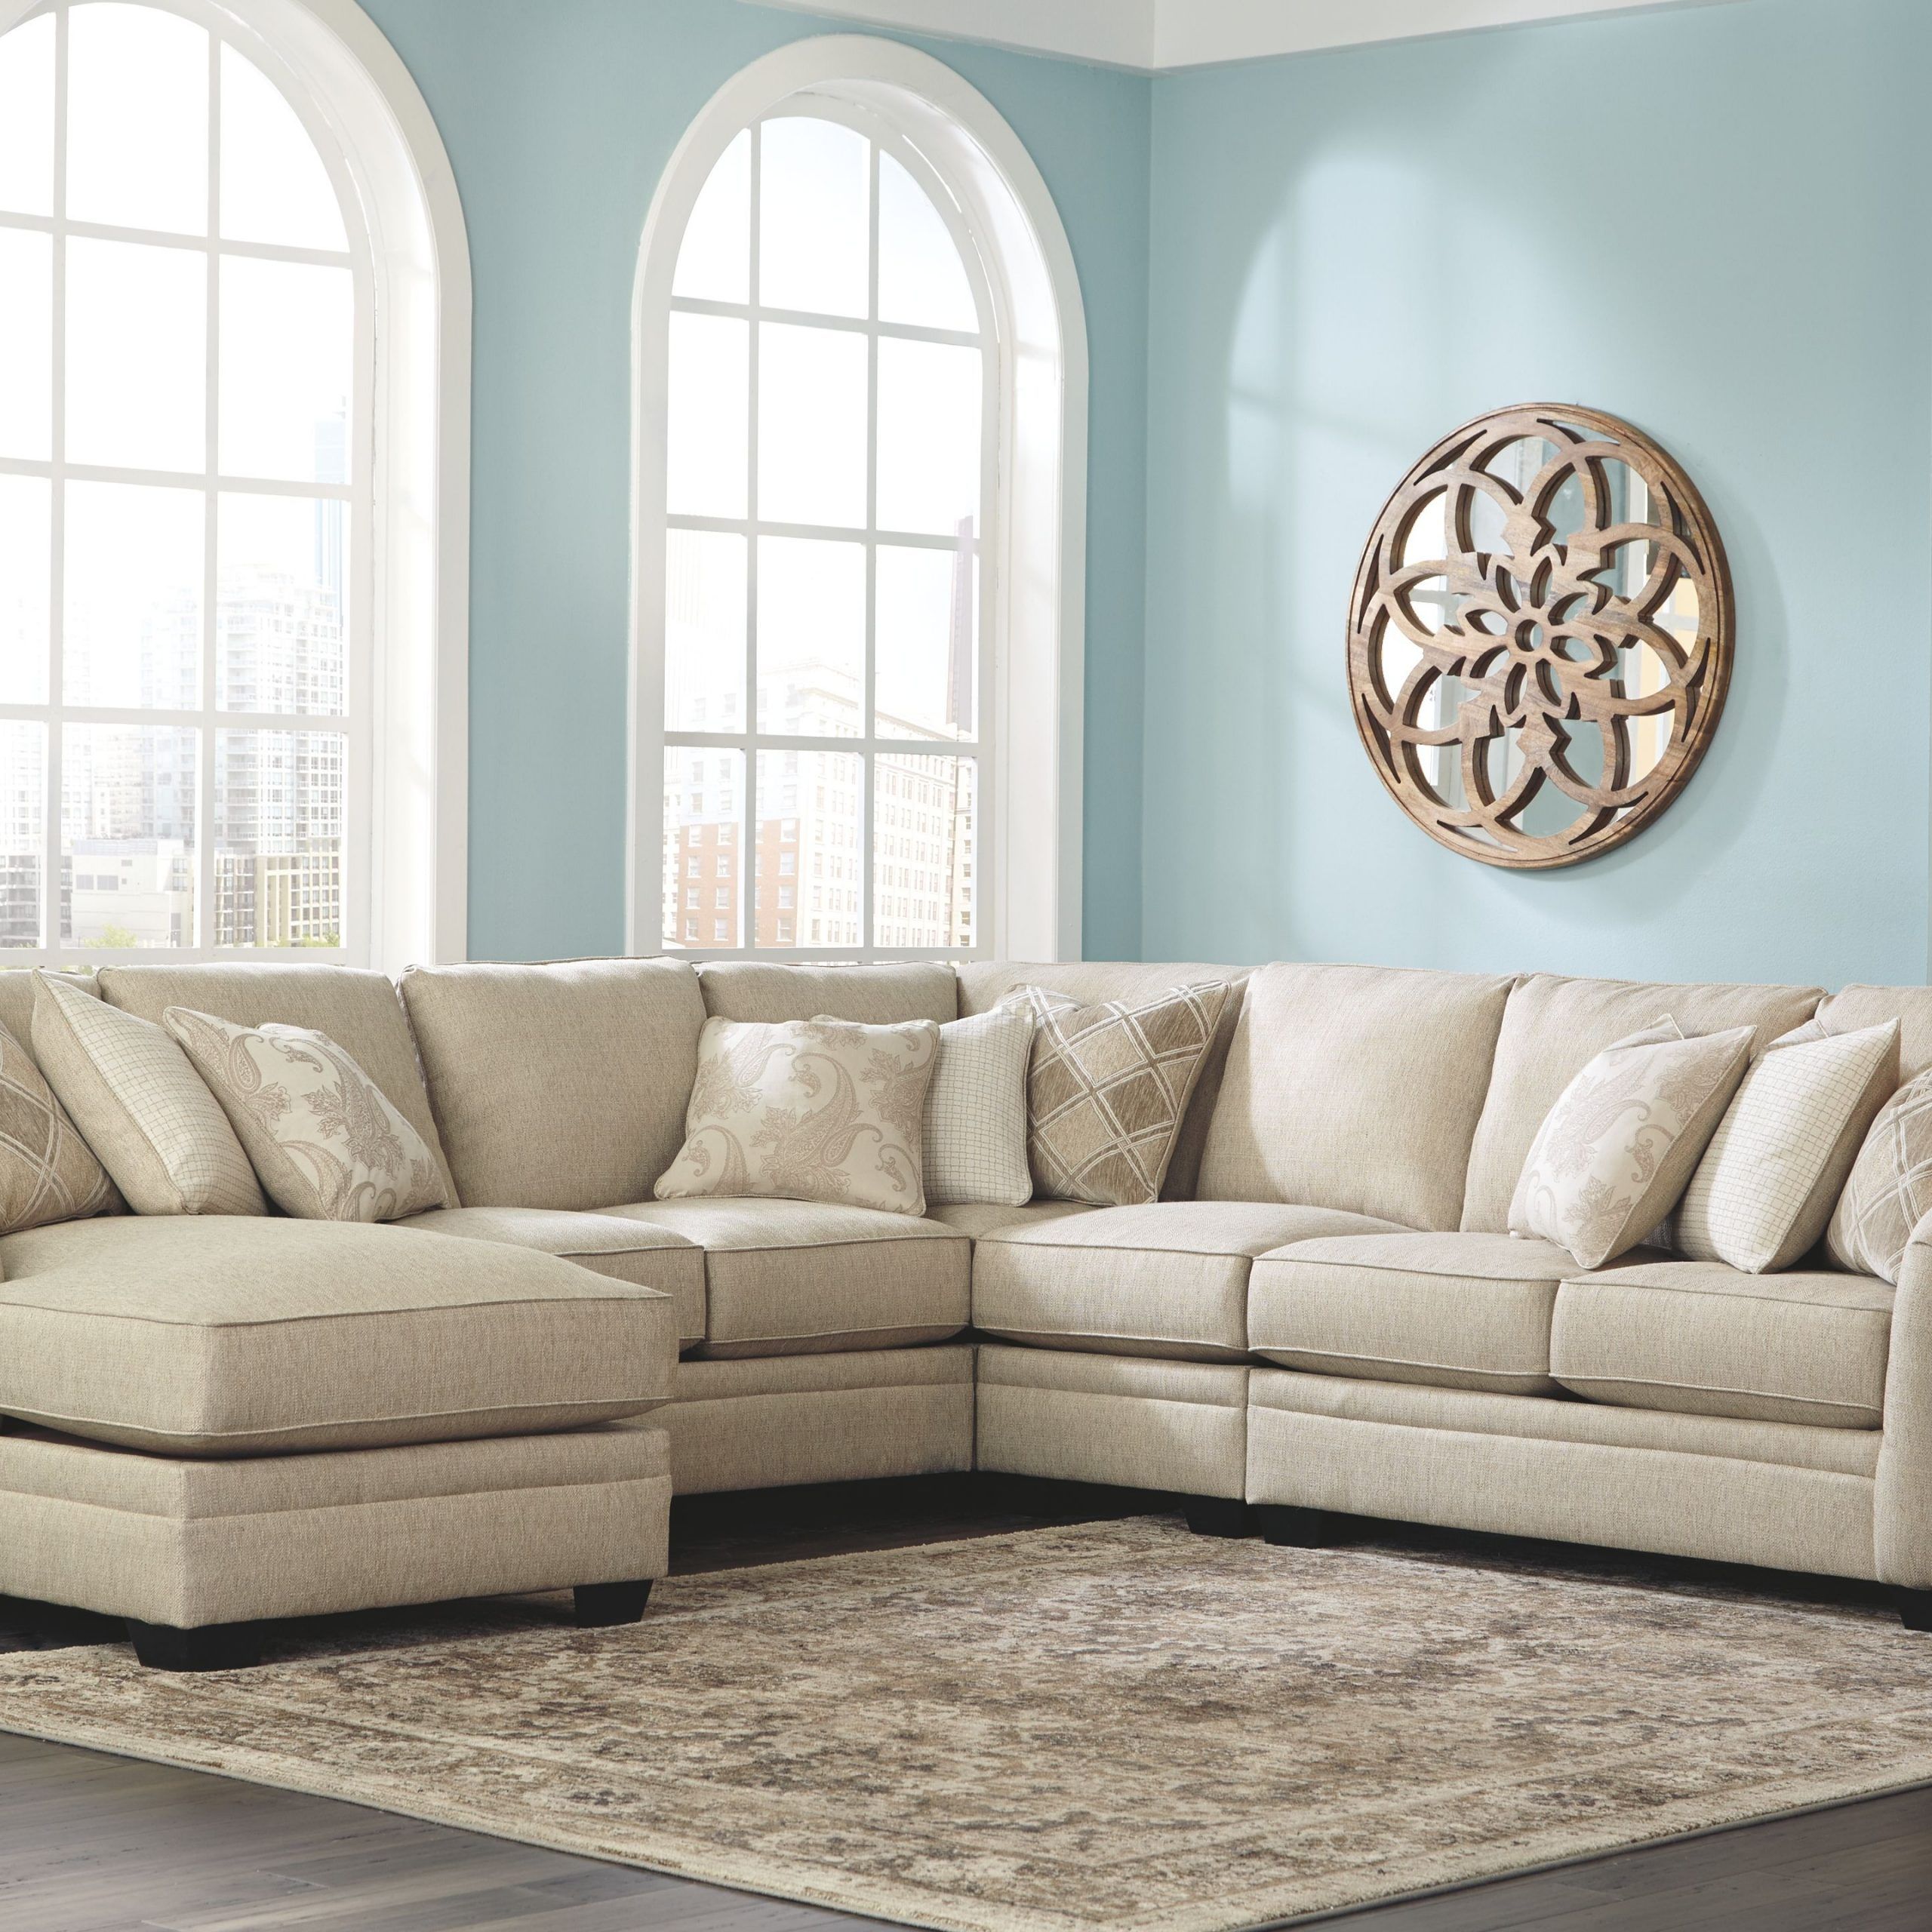 Luxora 5 Piece Sectional, Bisque | Sectional Sofa With Chaise With 5 Piece Console Tables (View 10 of 20)